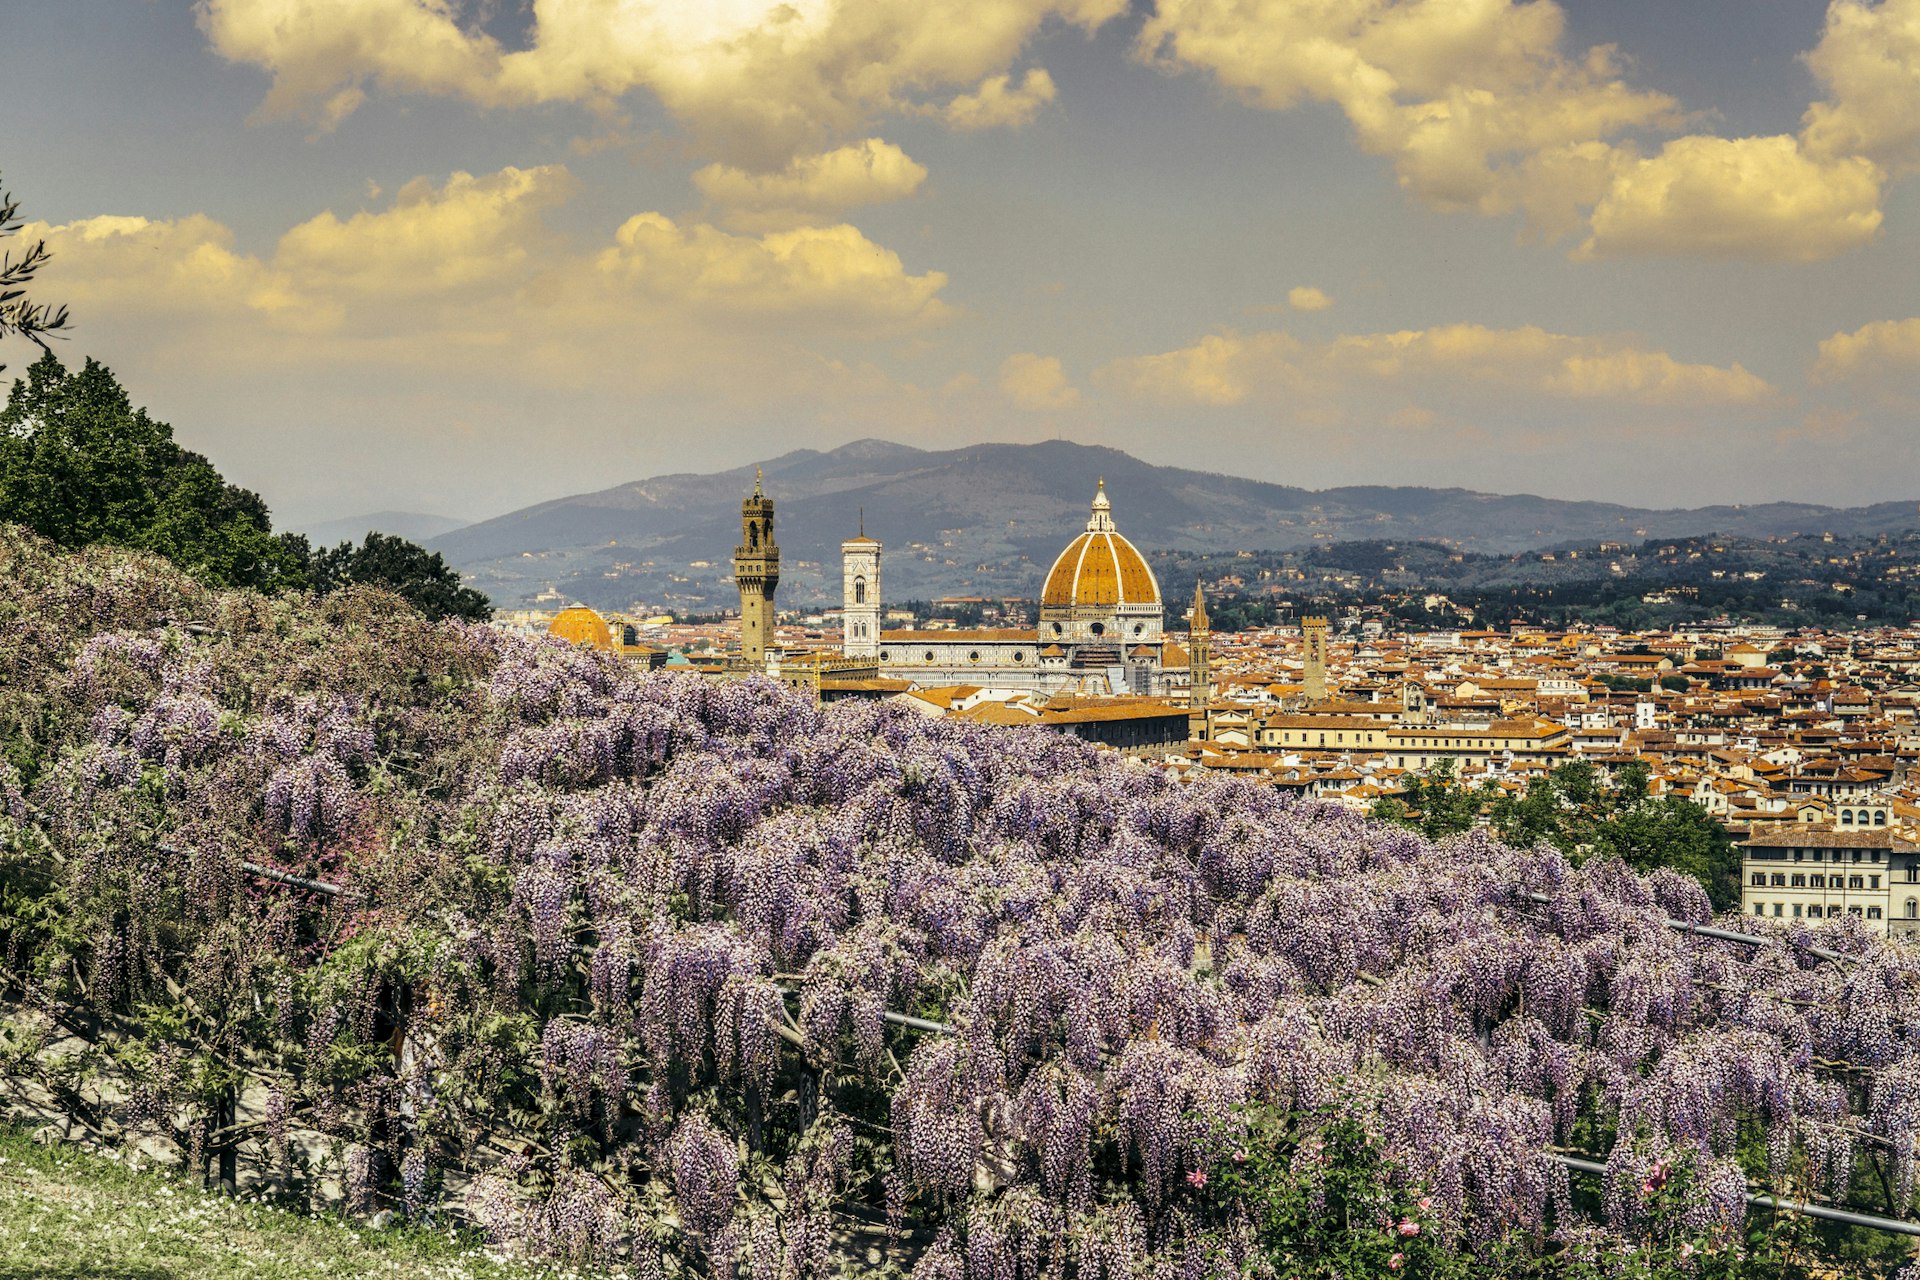 A sunny day; wisteria covers the foreground as a cityscape dominated by an ornate cathedral dome, stretches out in the distance